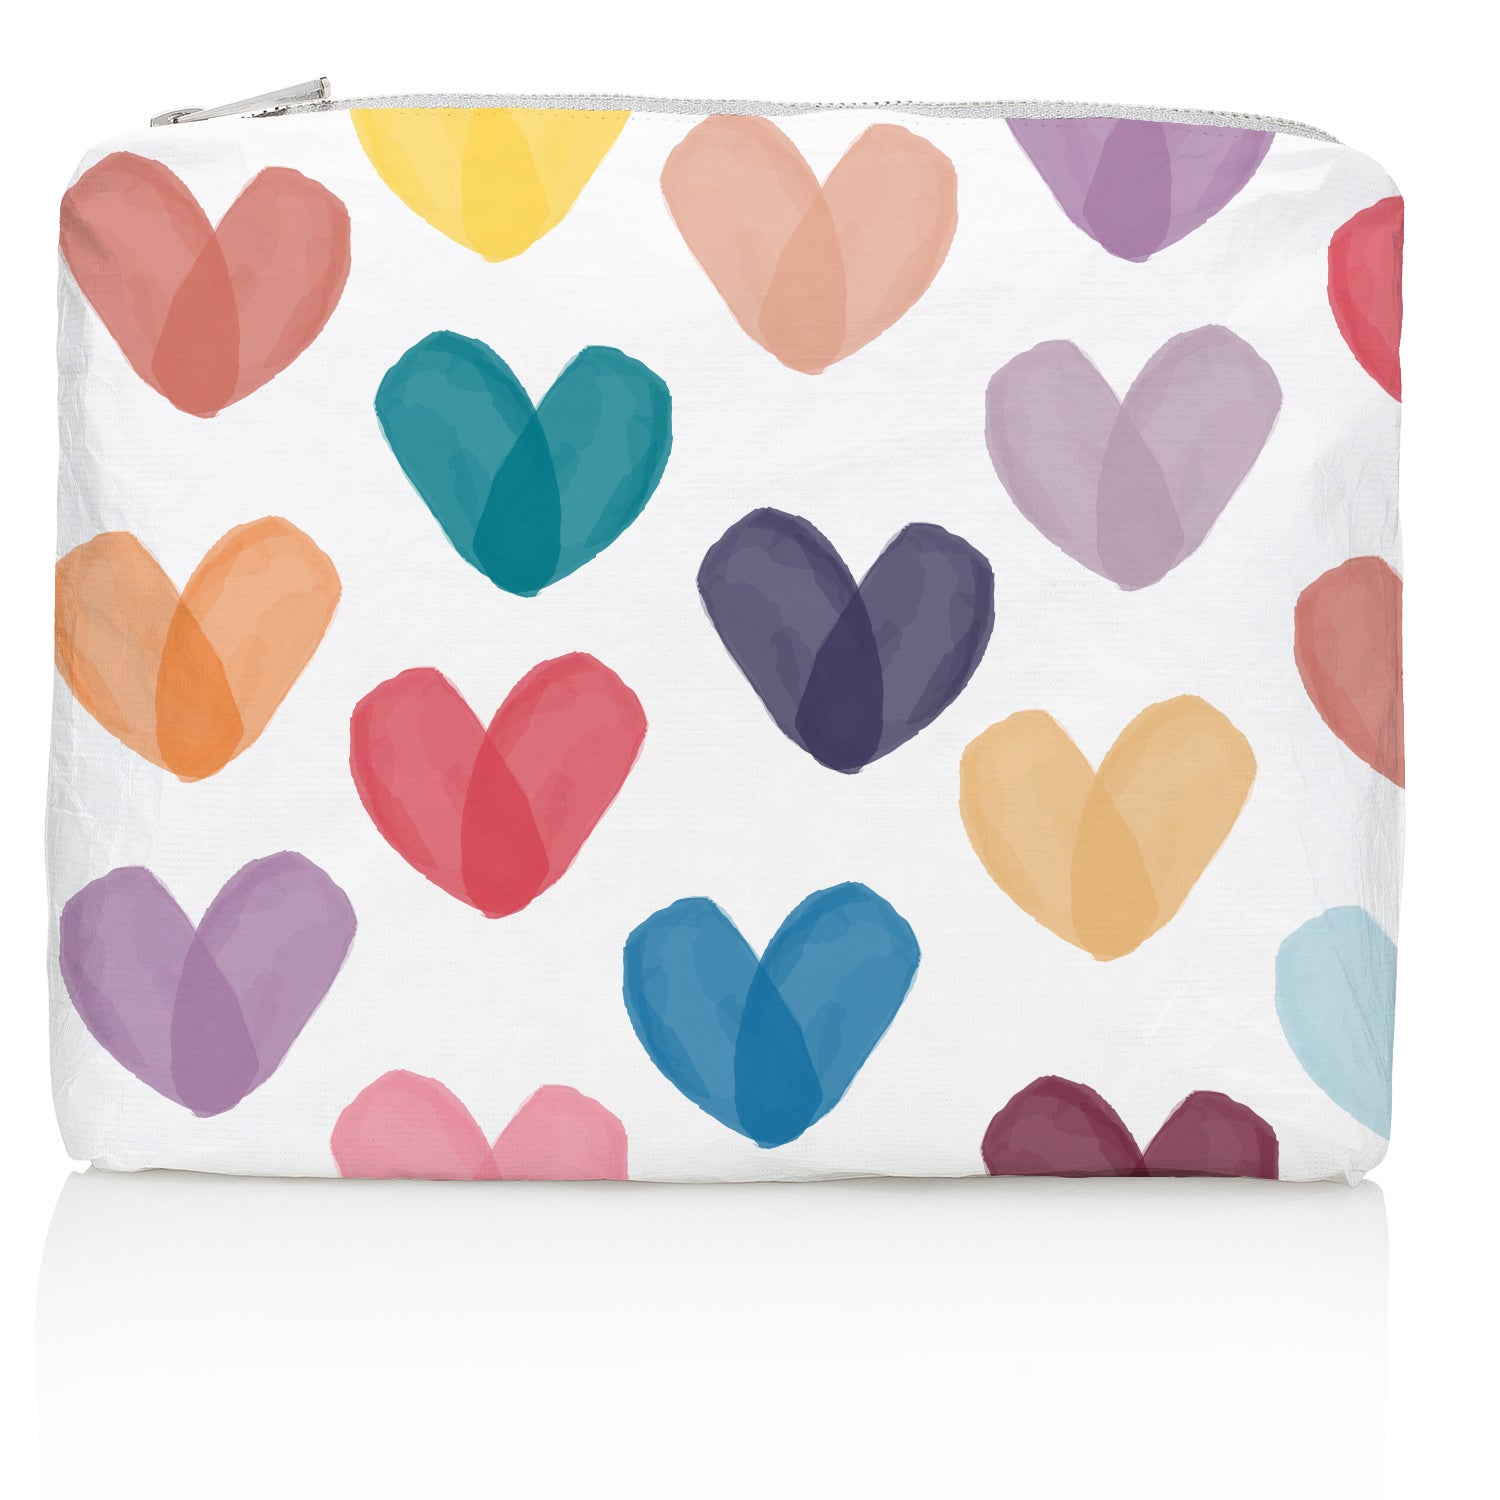 Get Your Purse, Tote Bag or Fanny Pack in Our Favorite Love Pattern